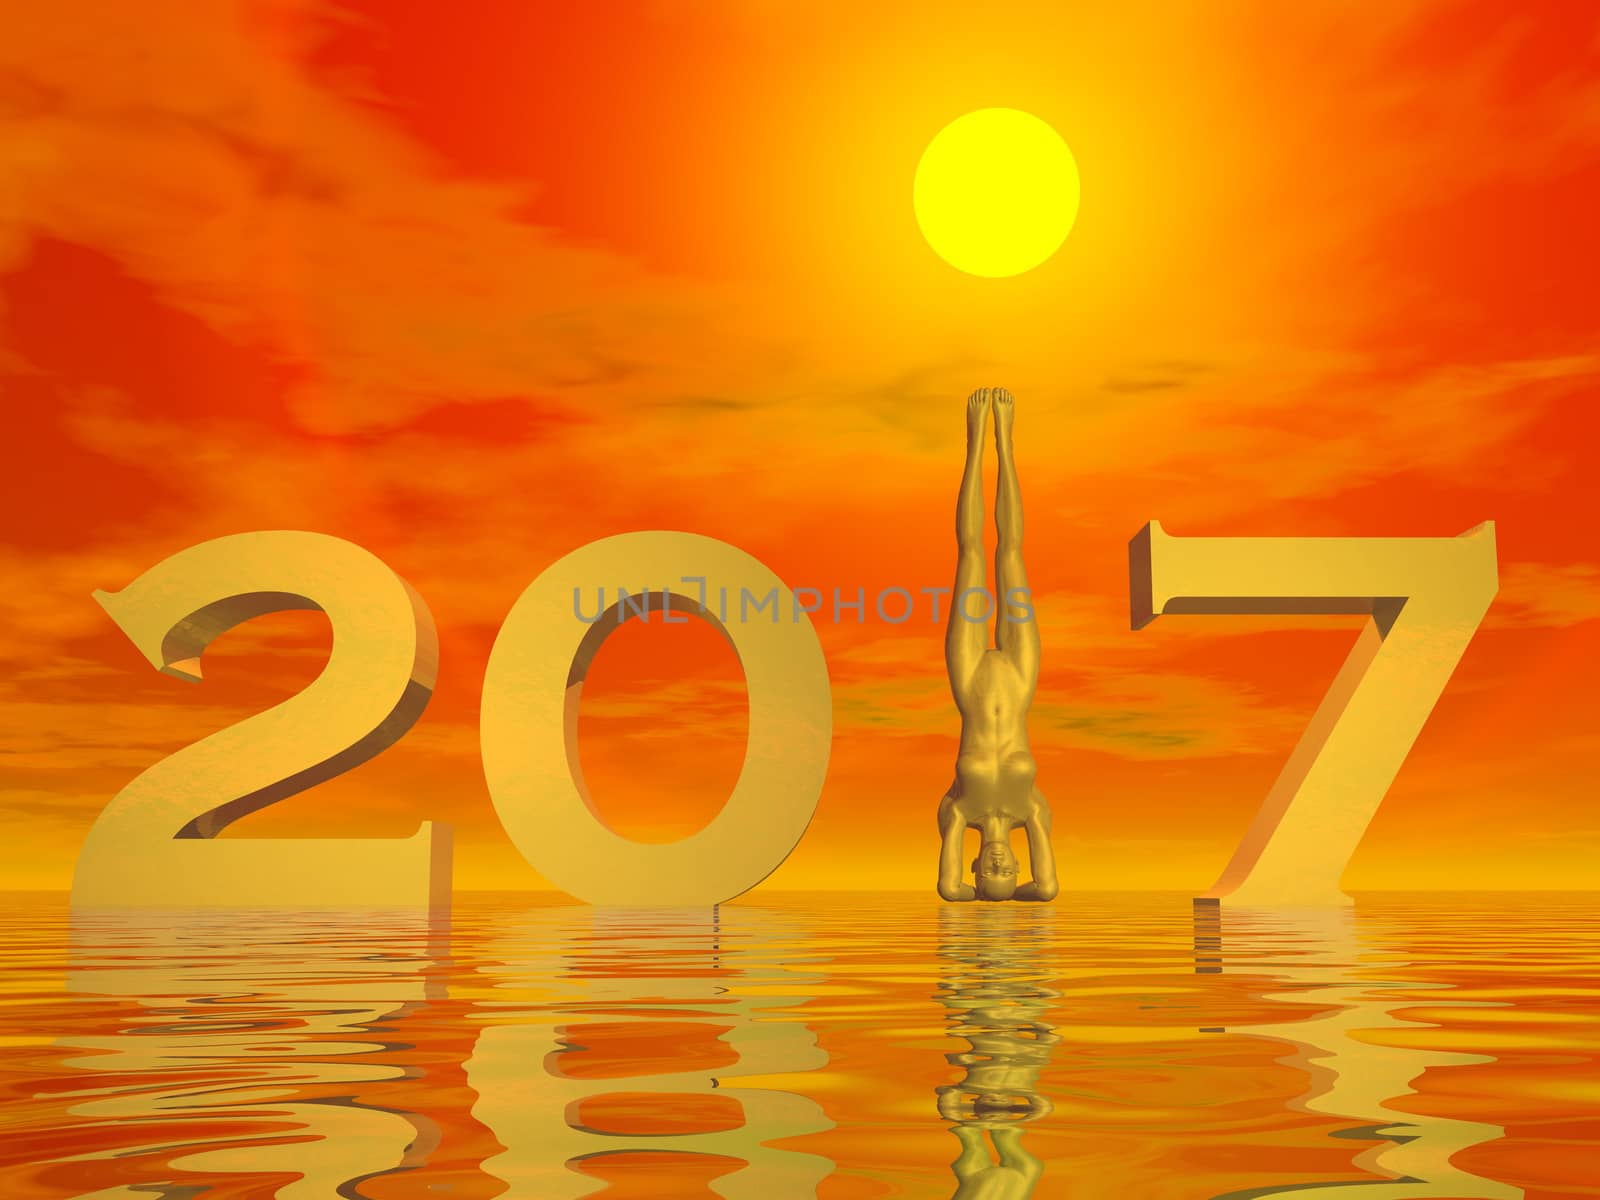 Peaceful and zen yogi new year 2017 in colorful sunset background - 3D render